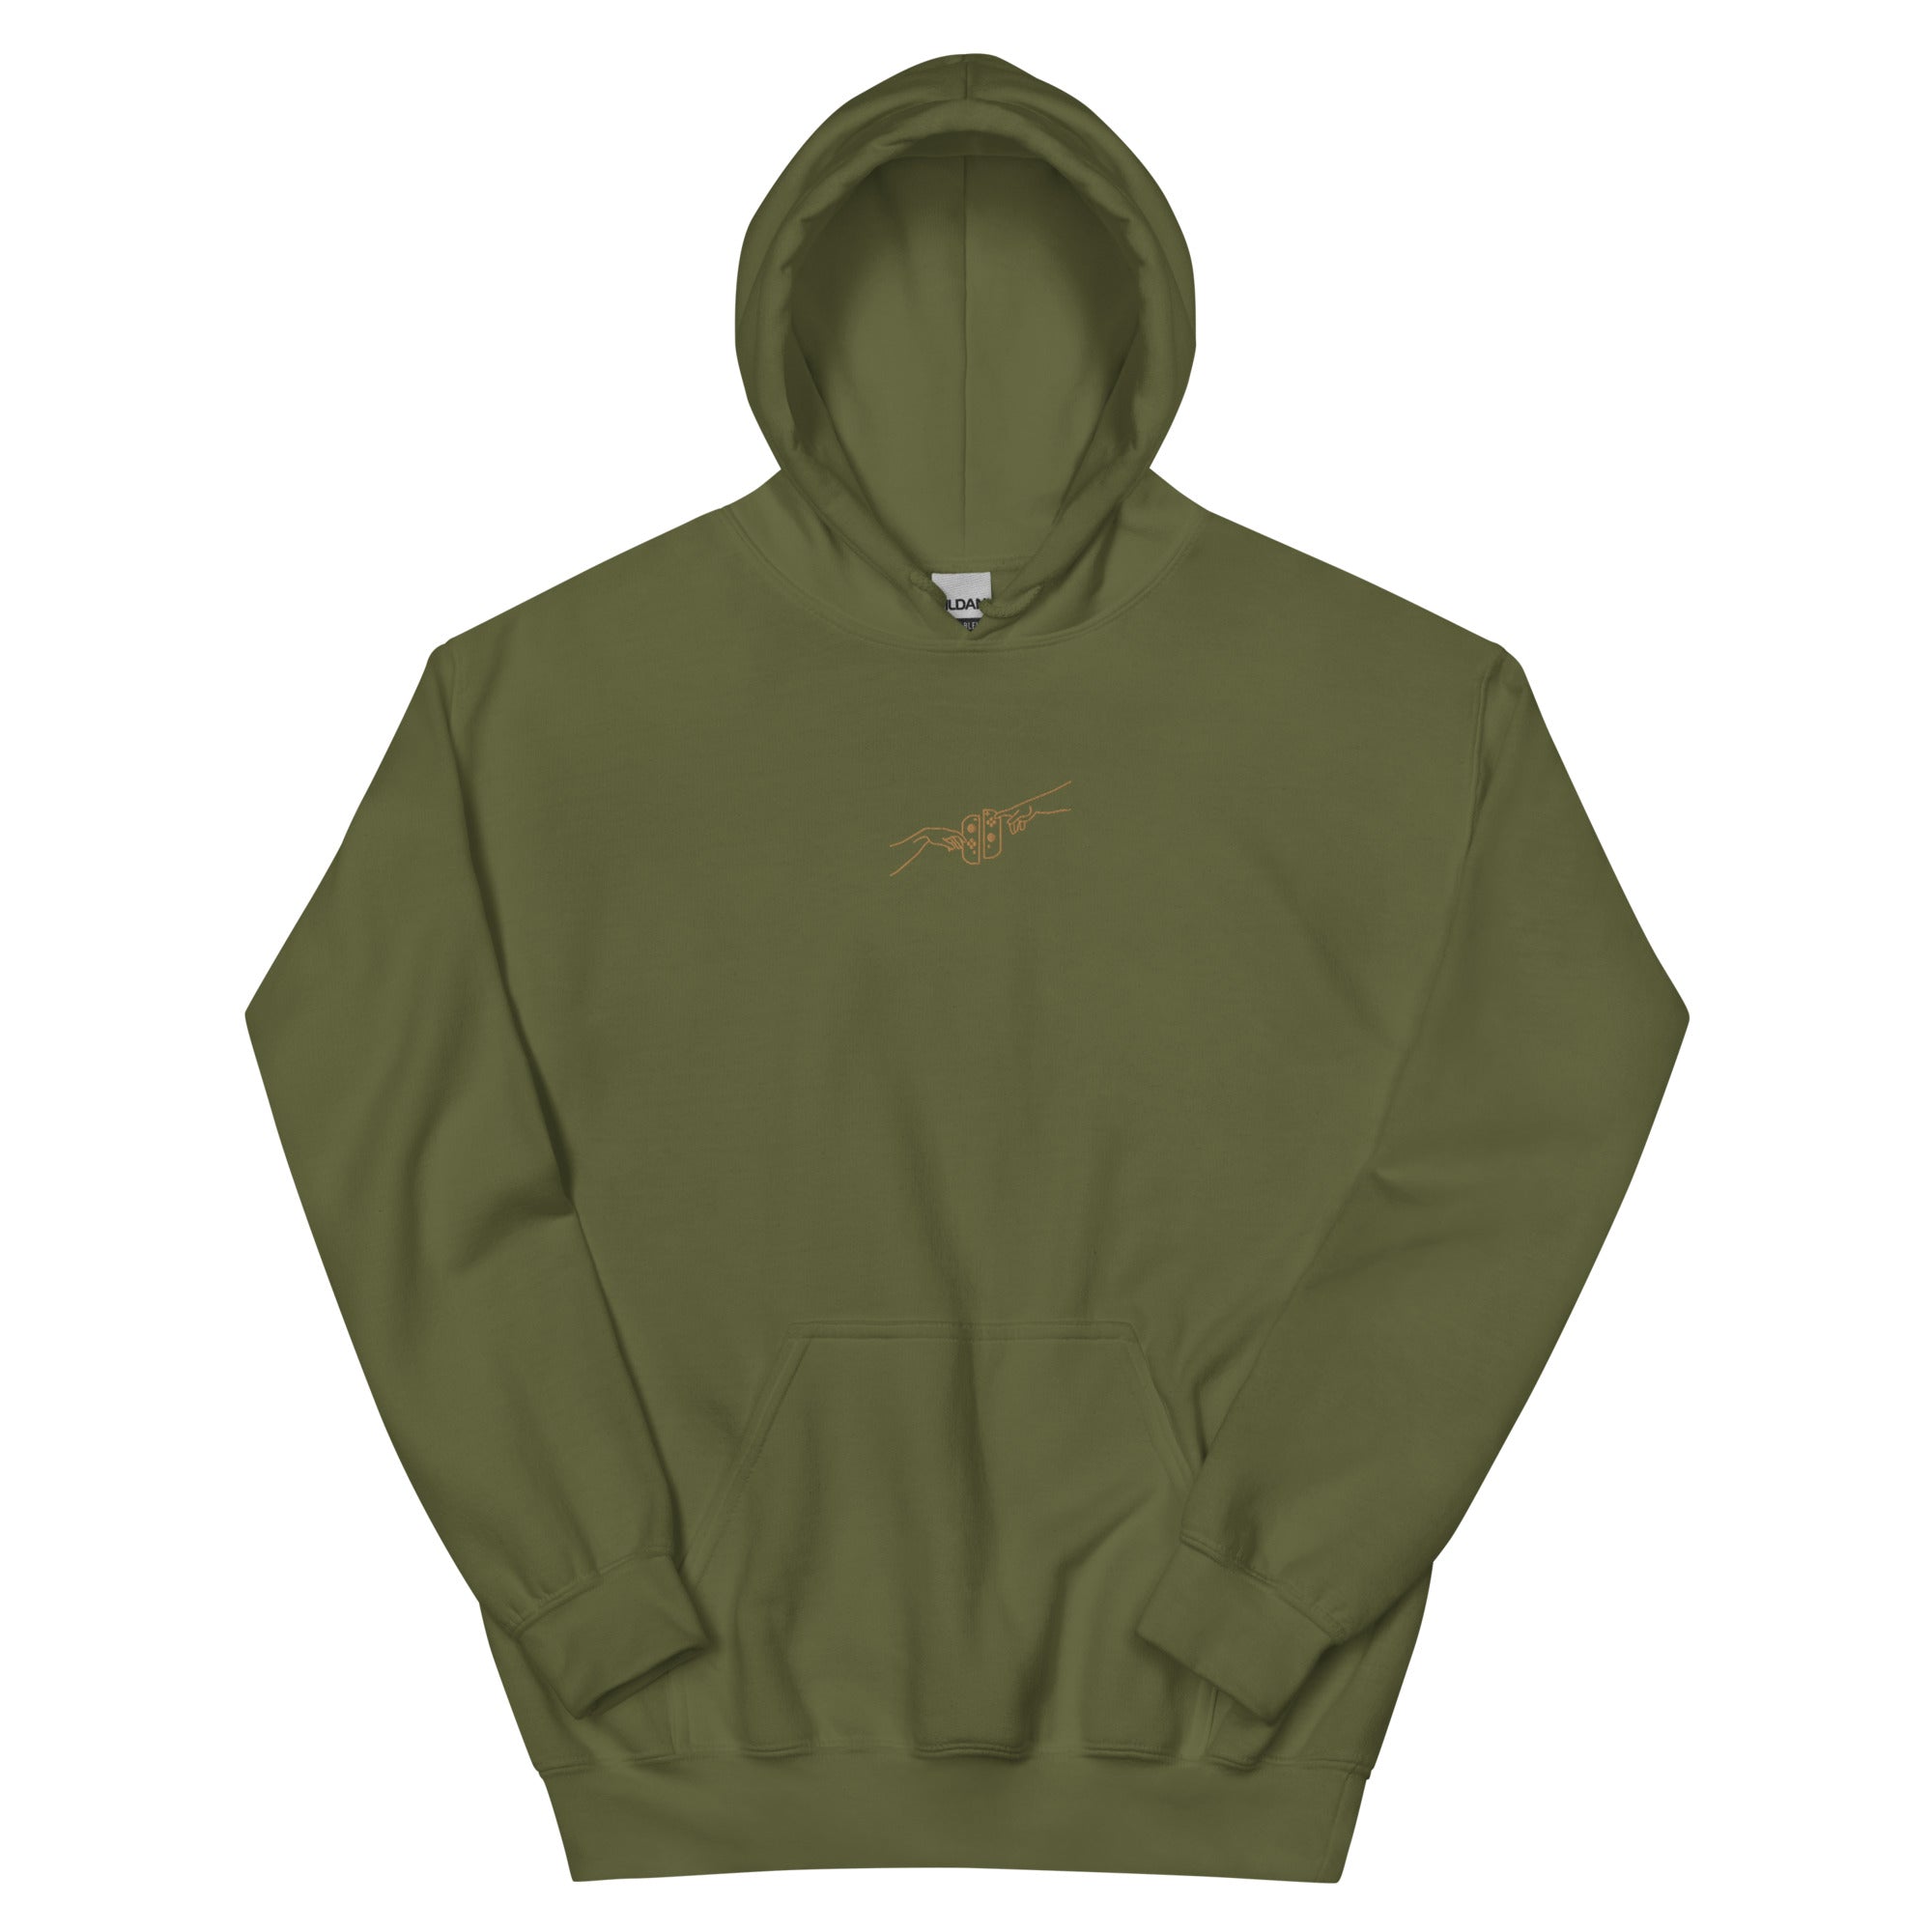 The Creation of Switch | Embroidered Unisex Hoodie | Cozy Gamer Threads and Thistles Inventory Military Green S 